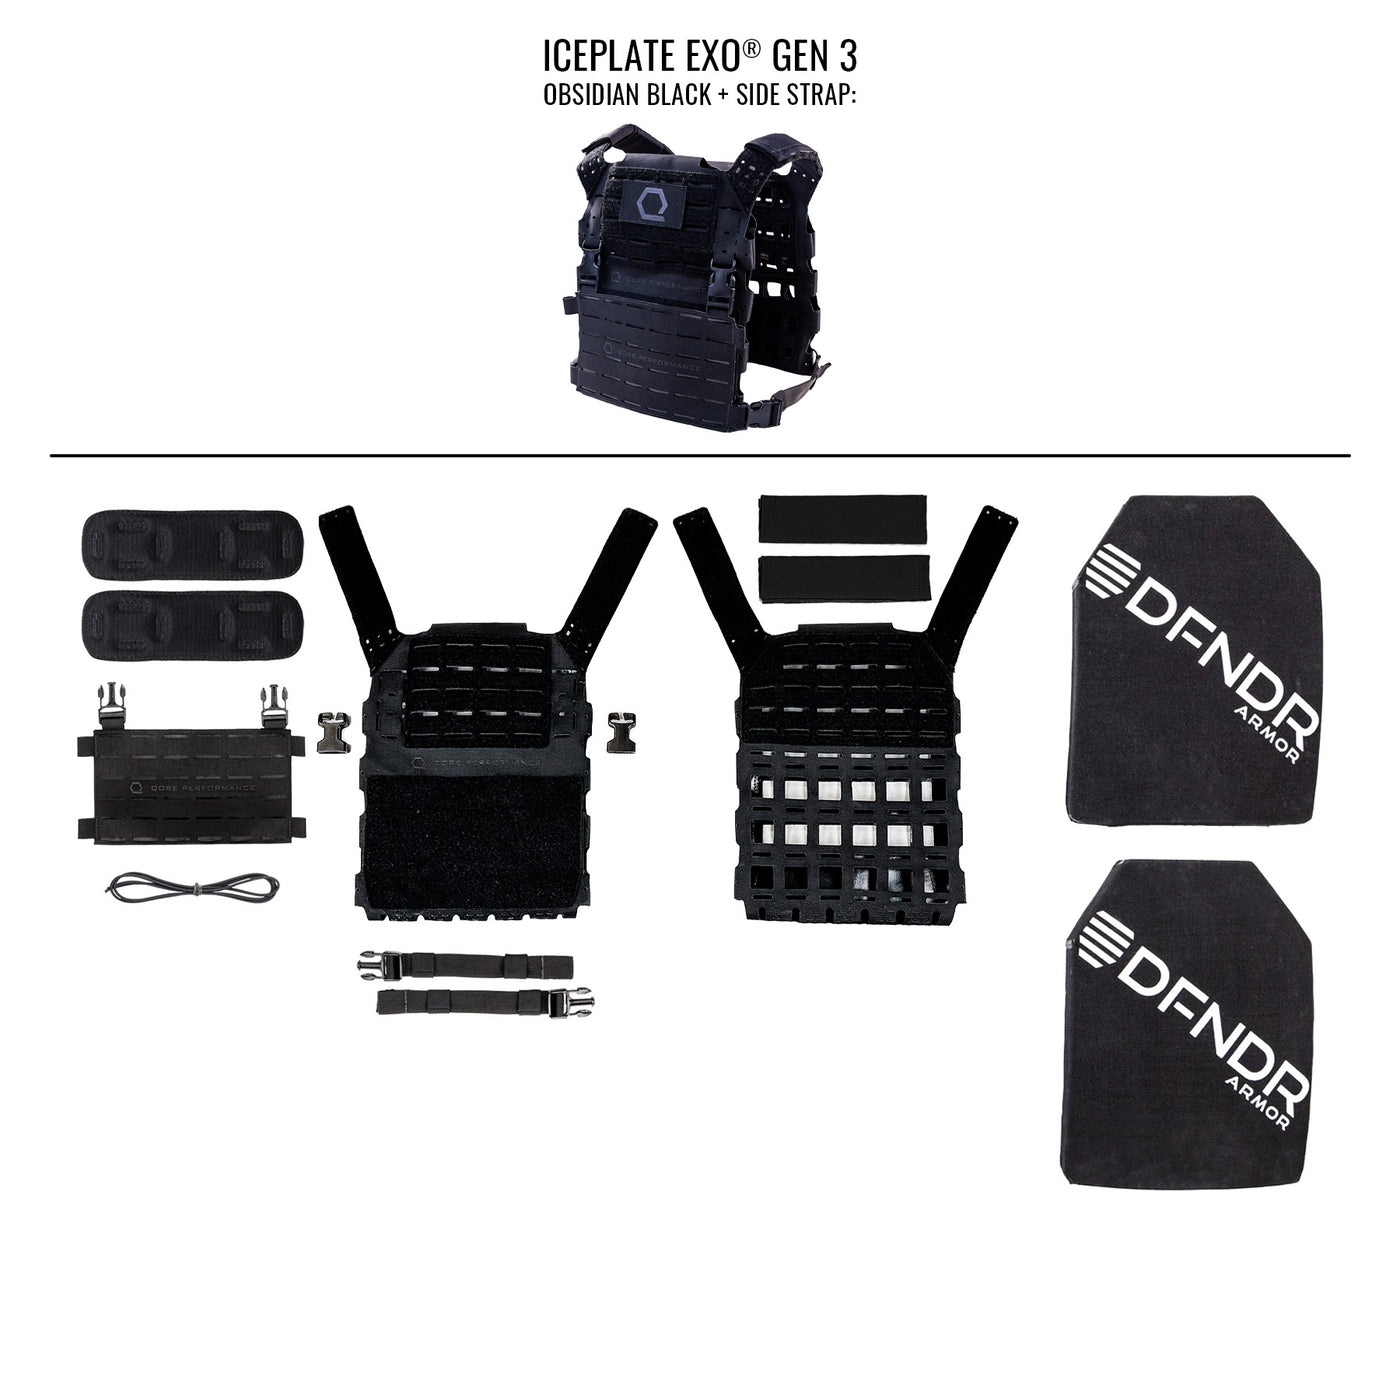 ICEPLATE EXO® Gen 3 DFNDR Level IV Armor Package - Launch Edition (includes 2 x DFNDR Armor Rifle Rated Hard Plates)